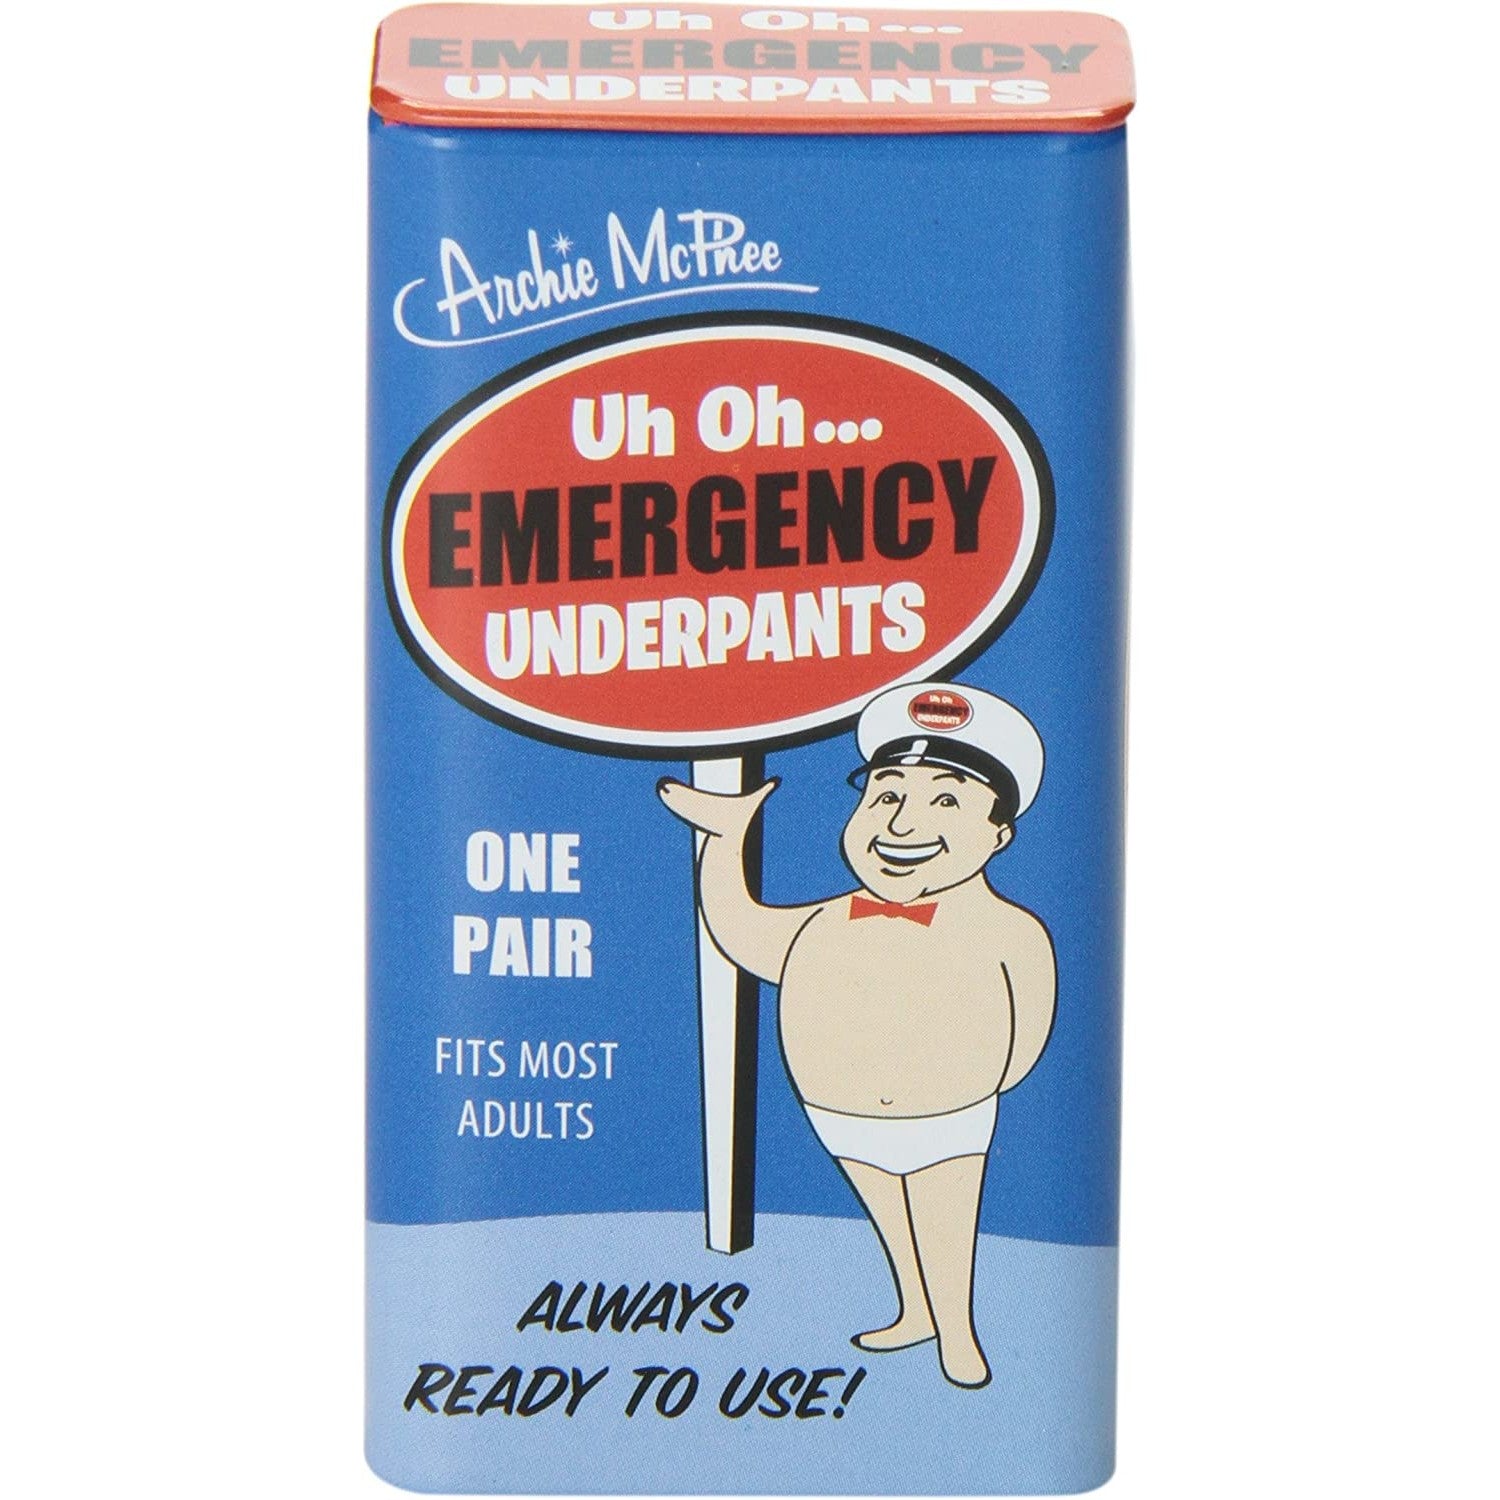 The tin-can packaging for a pair of emergency underpants made by Accoutrements.'